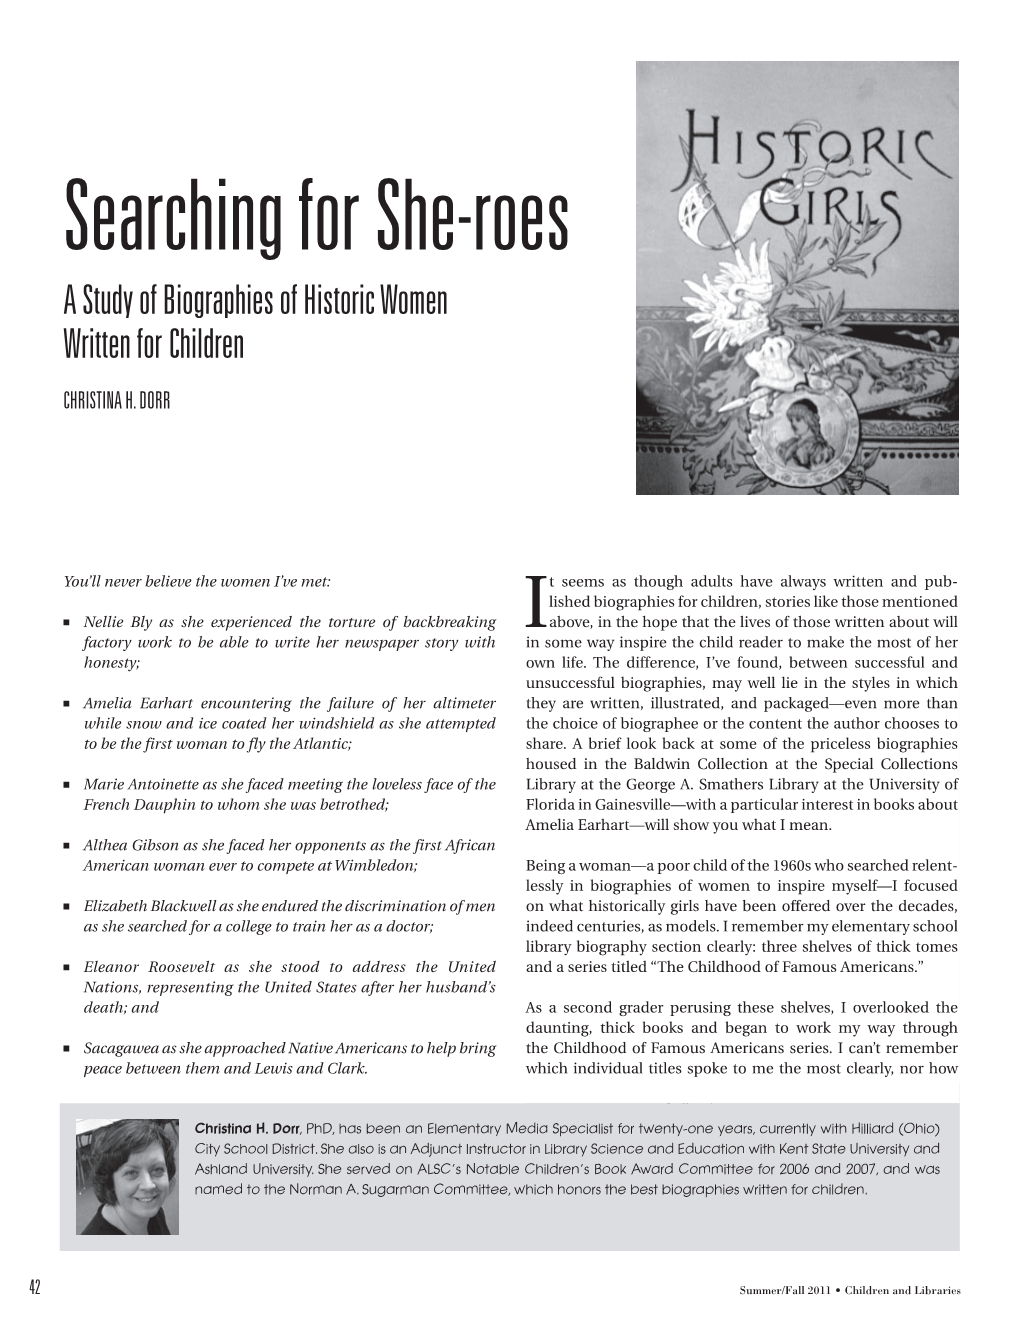 Searching for She-Roes: a Study of Biographies of Historic Women